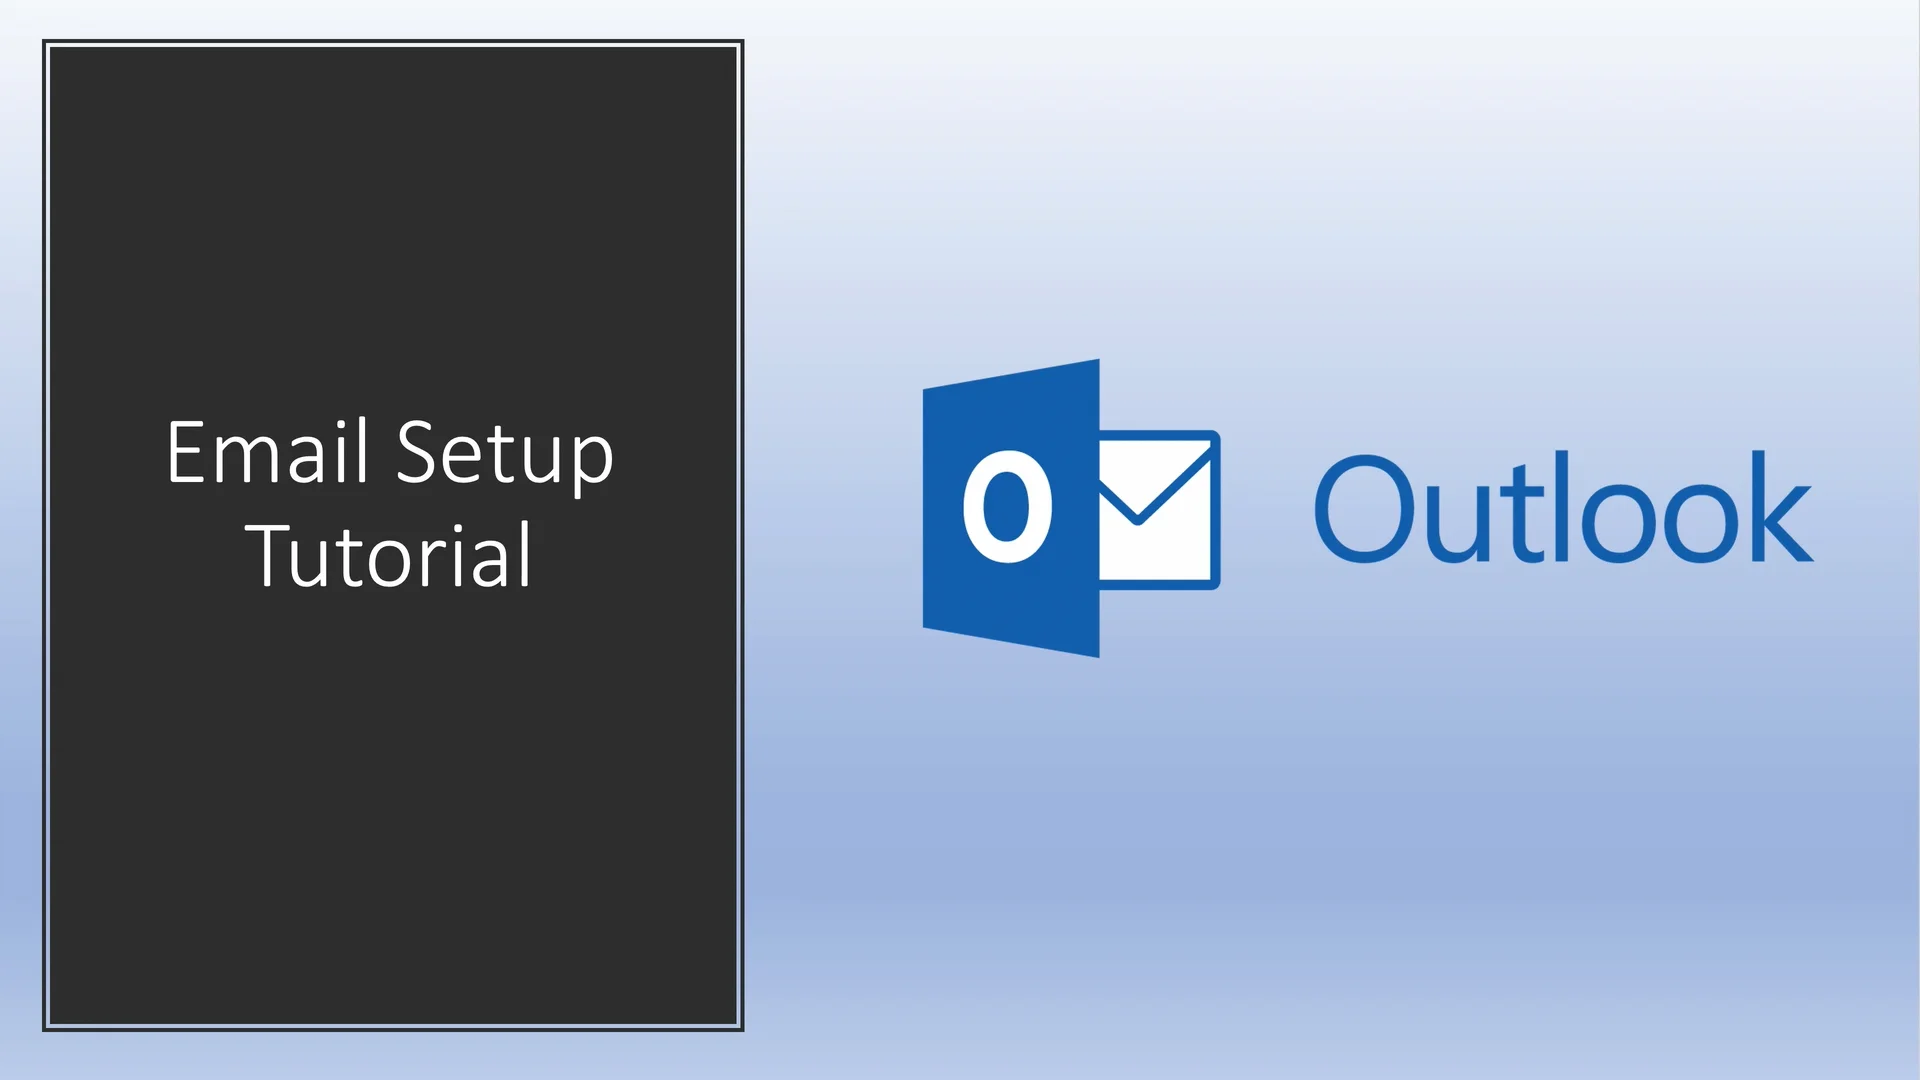 How to use Microsoft Outlook - Tutorial for Beginners 